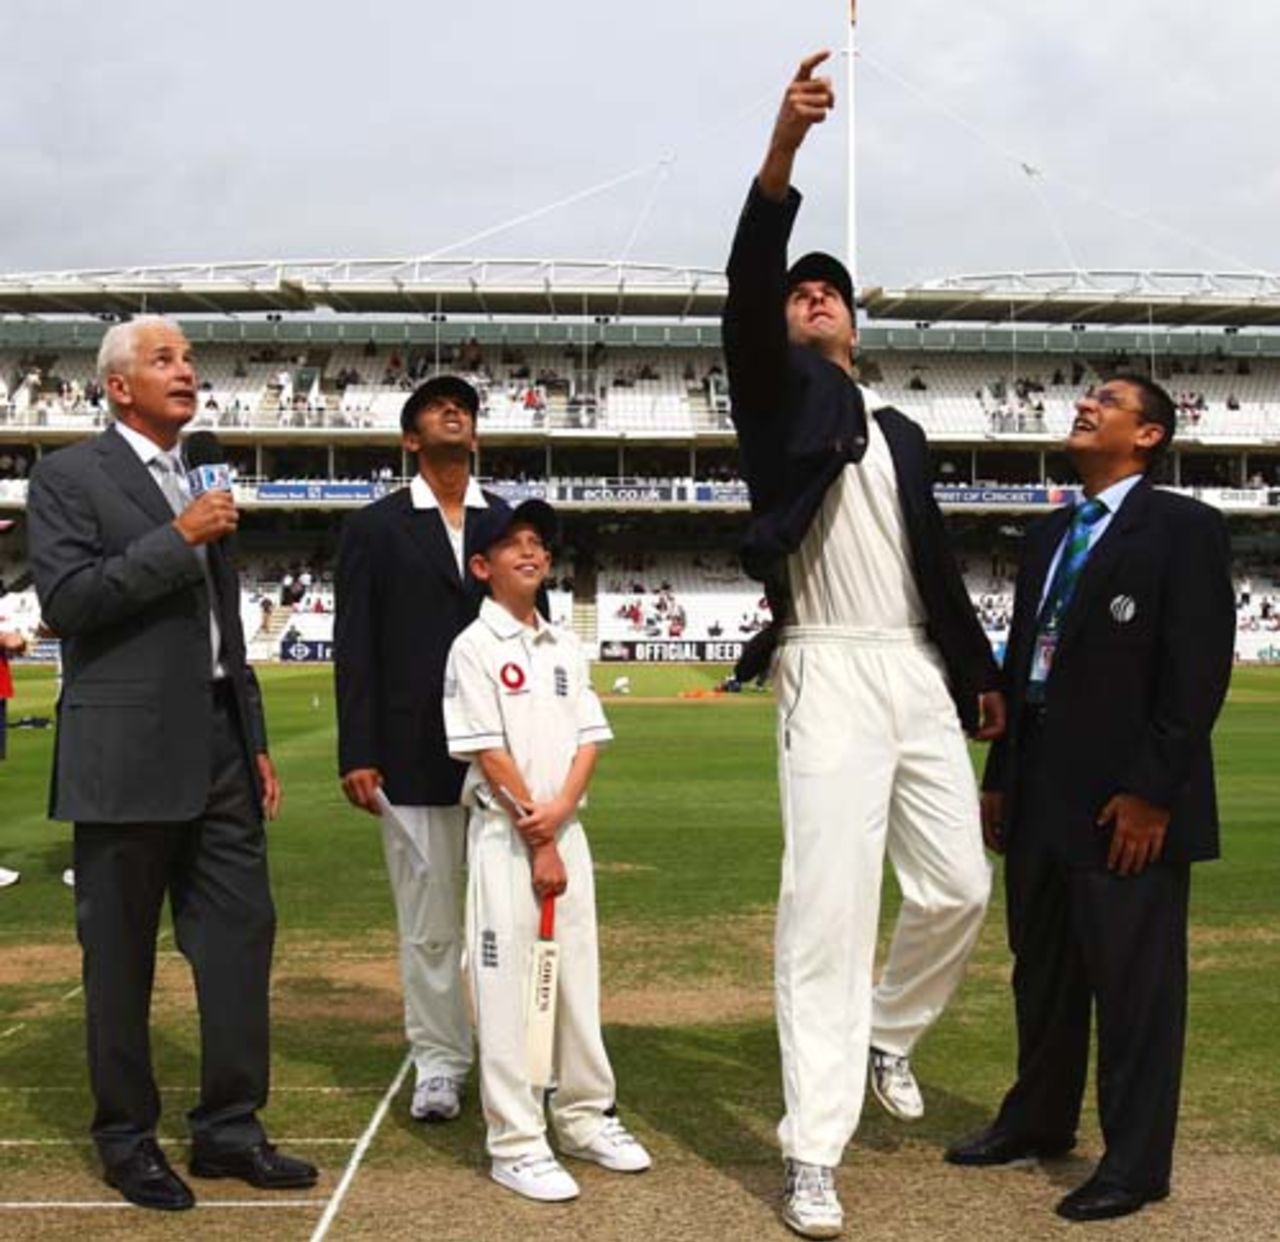 Michael Vaughan and Rahul Dravid at the toss with Ranjan Madugalle, the match referee, England v India, 1st Test, Lord's, 1st day, July 19, 2007